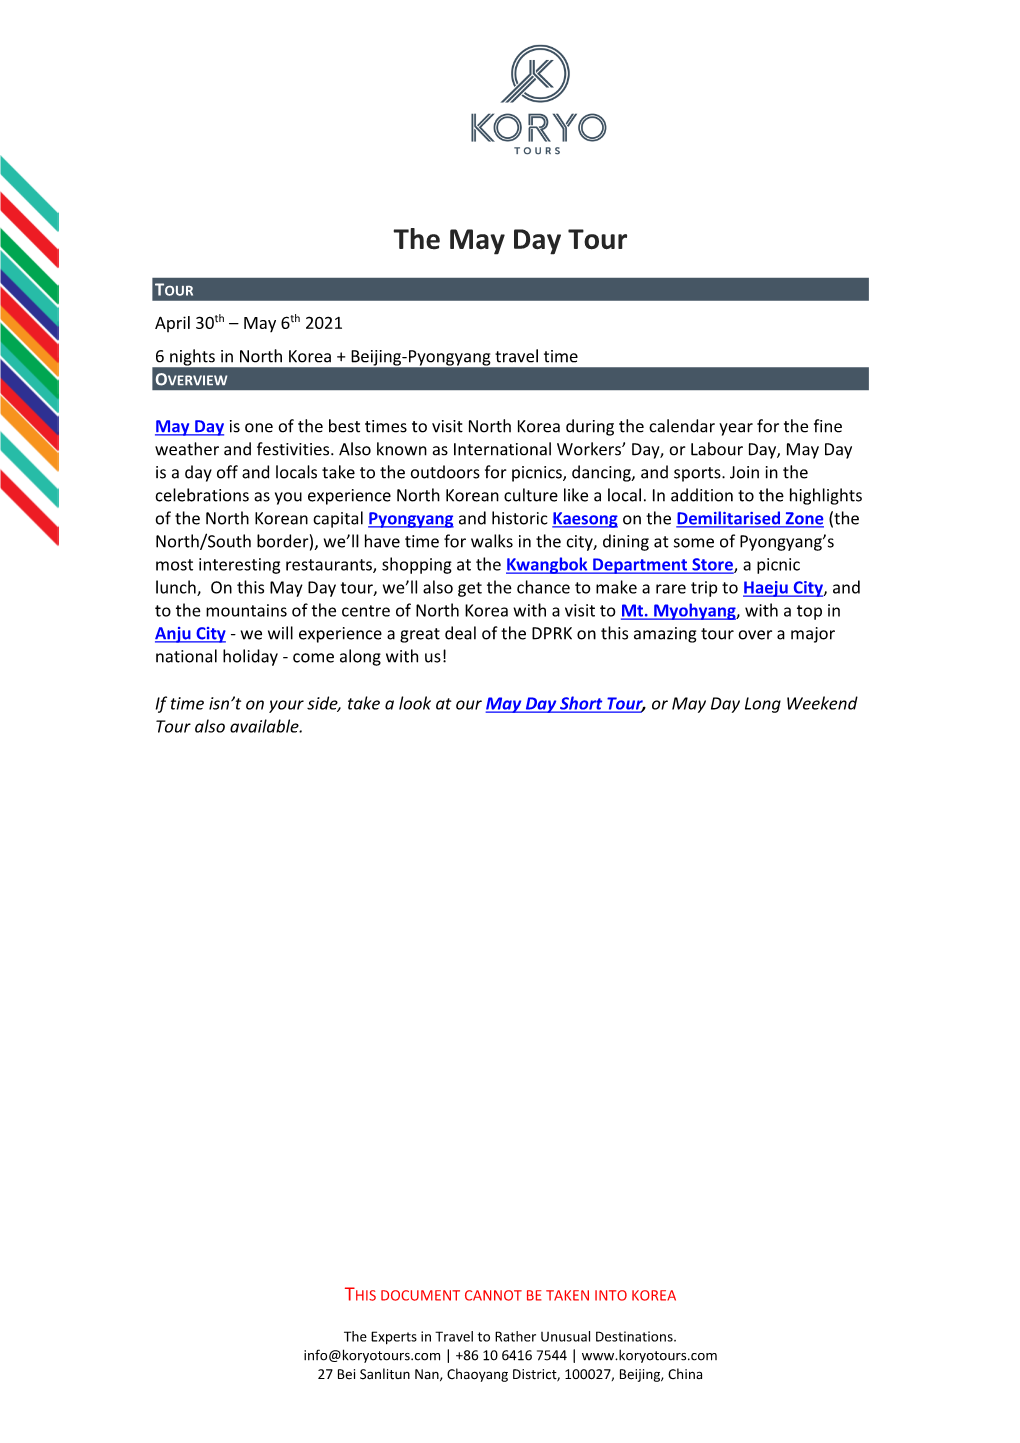 The May Day Tour